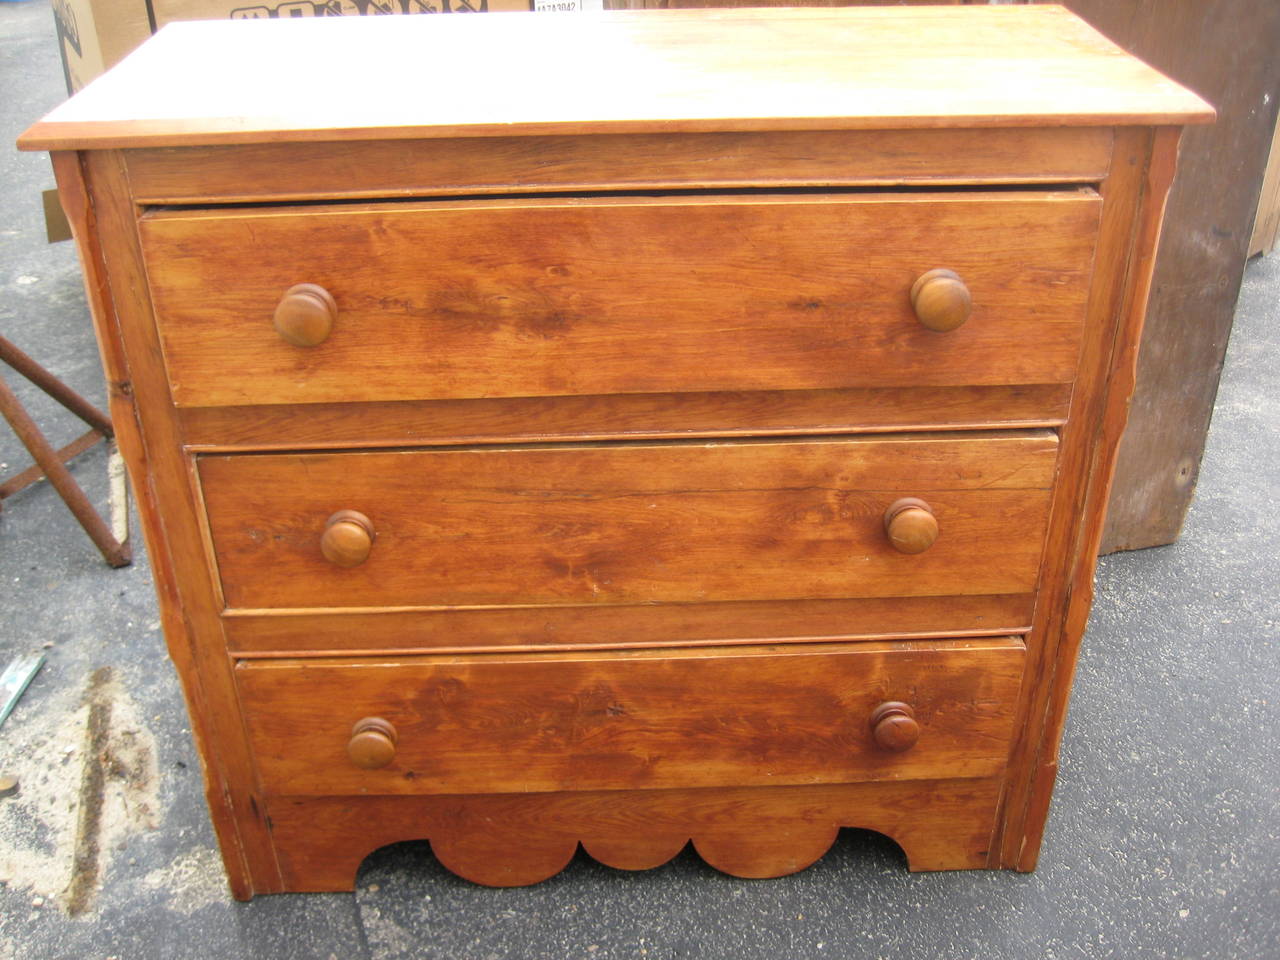 Pine Chest of Drawers with traces of original red paint and a nicely shaped skirt.